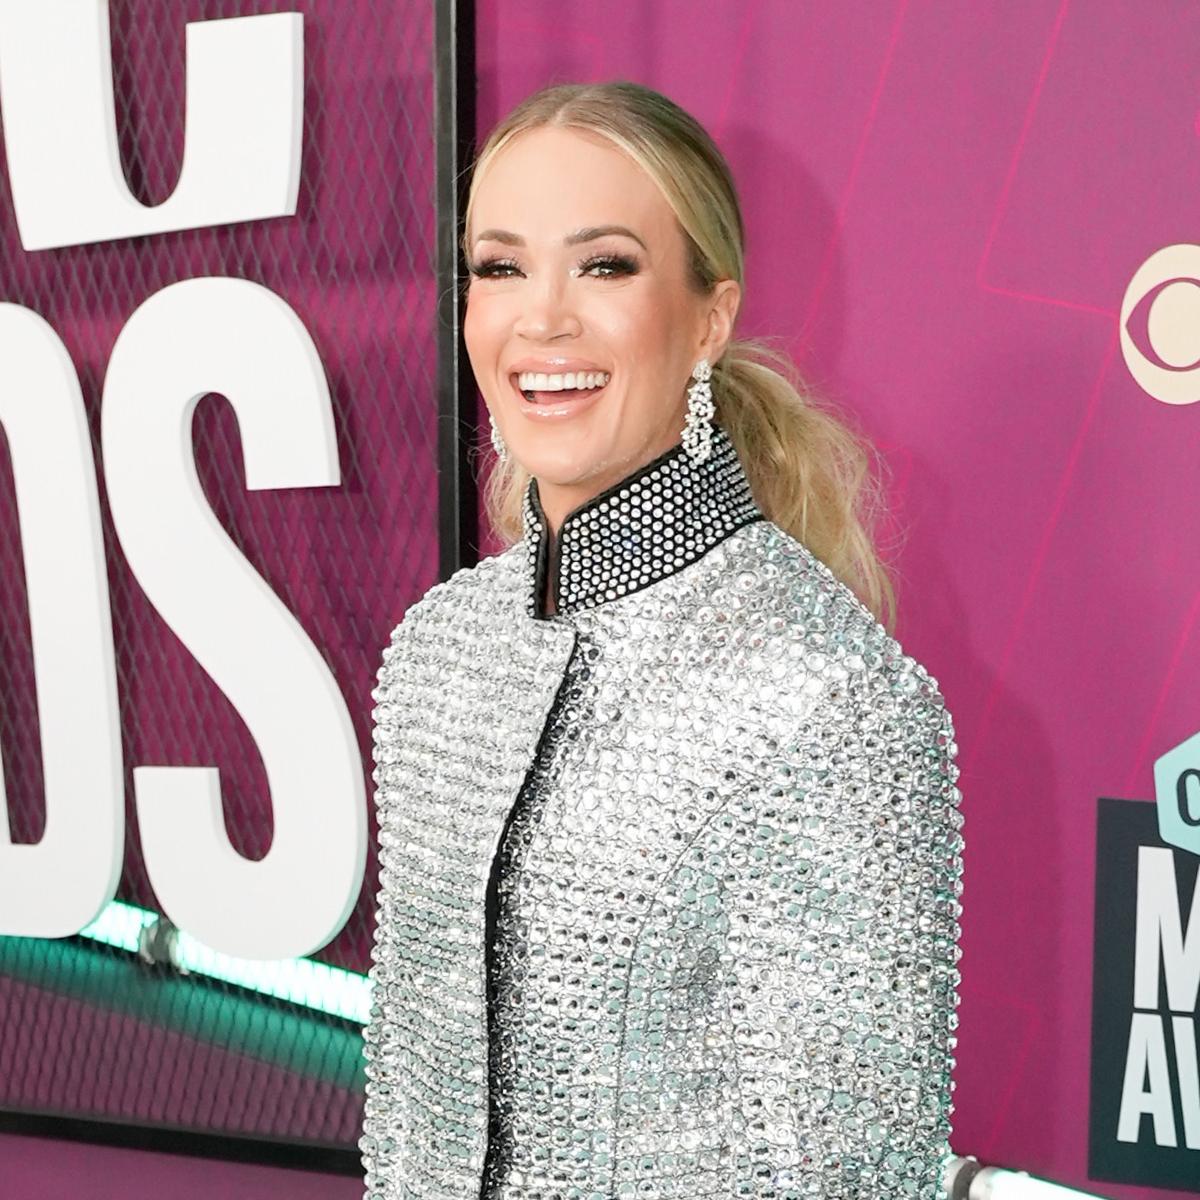 Carrie Underwood's Fans Are Losing It After The Singer Is